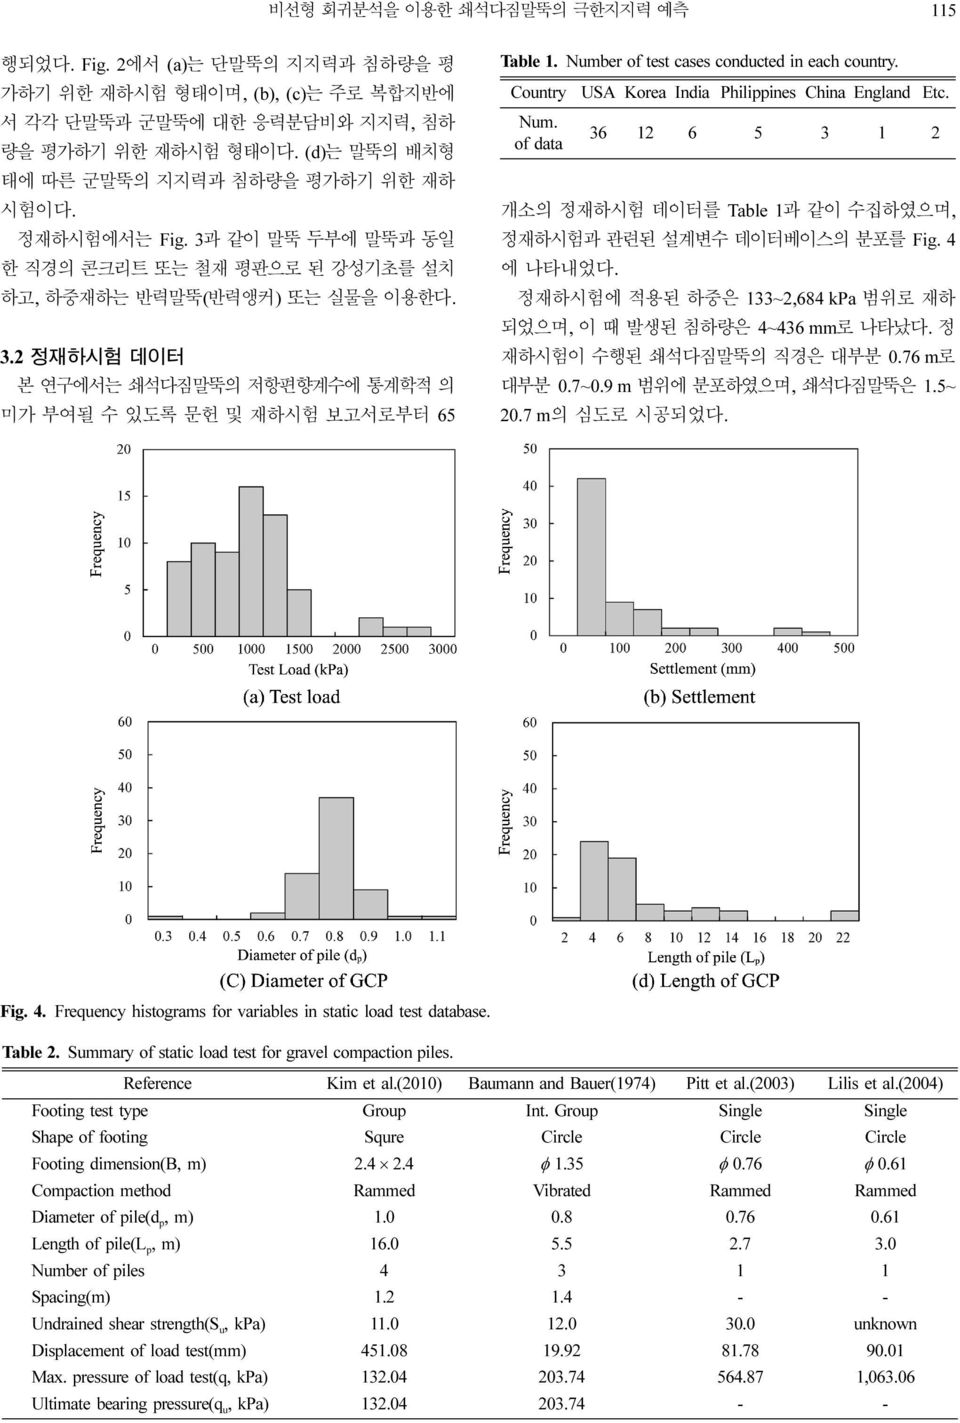 Number of test cases conducted in each country. Country USA Korea India Philippines China England Etc. Num. 36 12 6 5 3 1 2 of data 개소의 정재하시험 데이터를 Table 1과 같이 수집하였으며, 정재하시험과 관련된 설계변수 데이터베이스의 분포를 Fig.